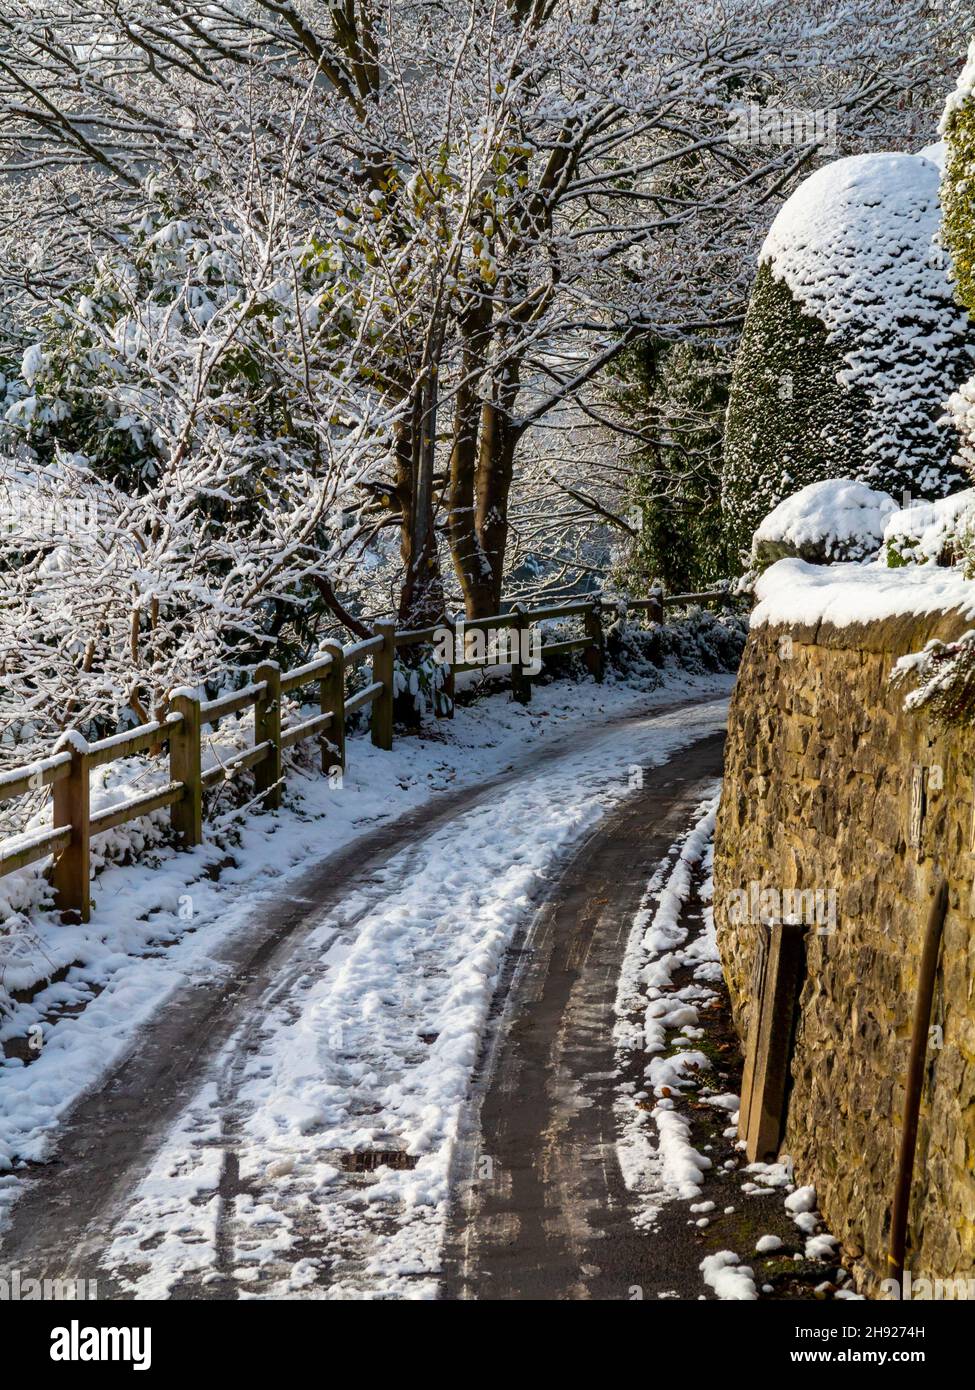 Snow covered road with trees at Matlock Bath in the Derbyshire Peak District England UK with tyre tracks visible in the snow. Stock Photo